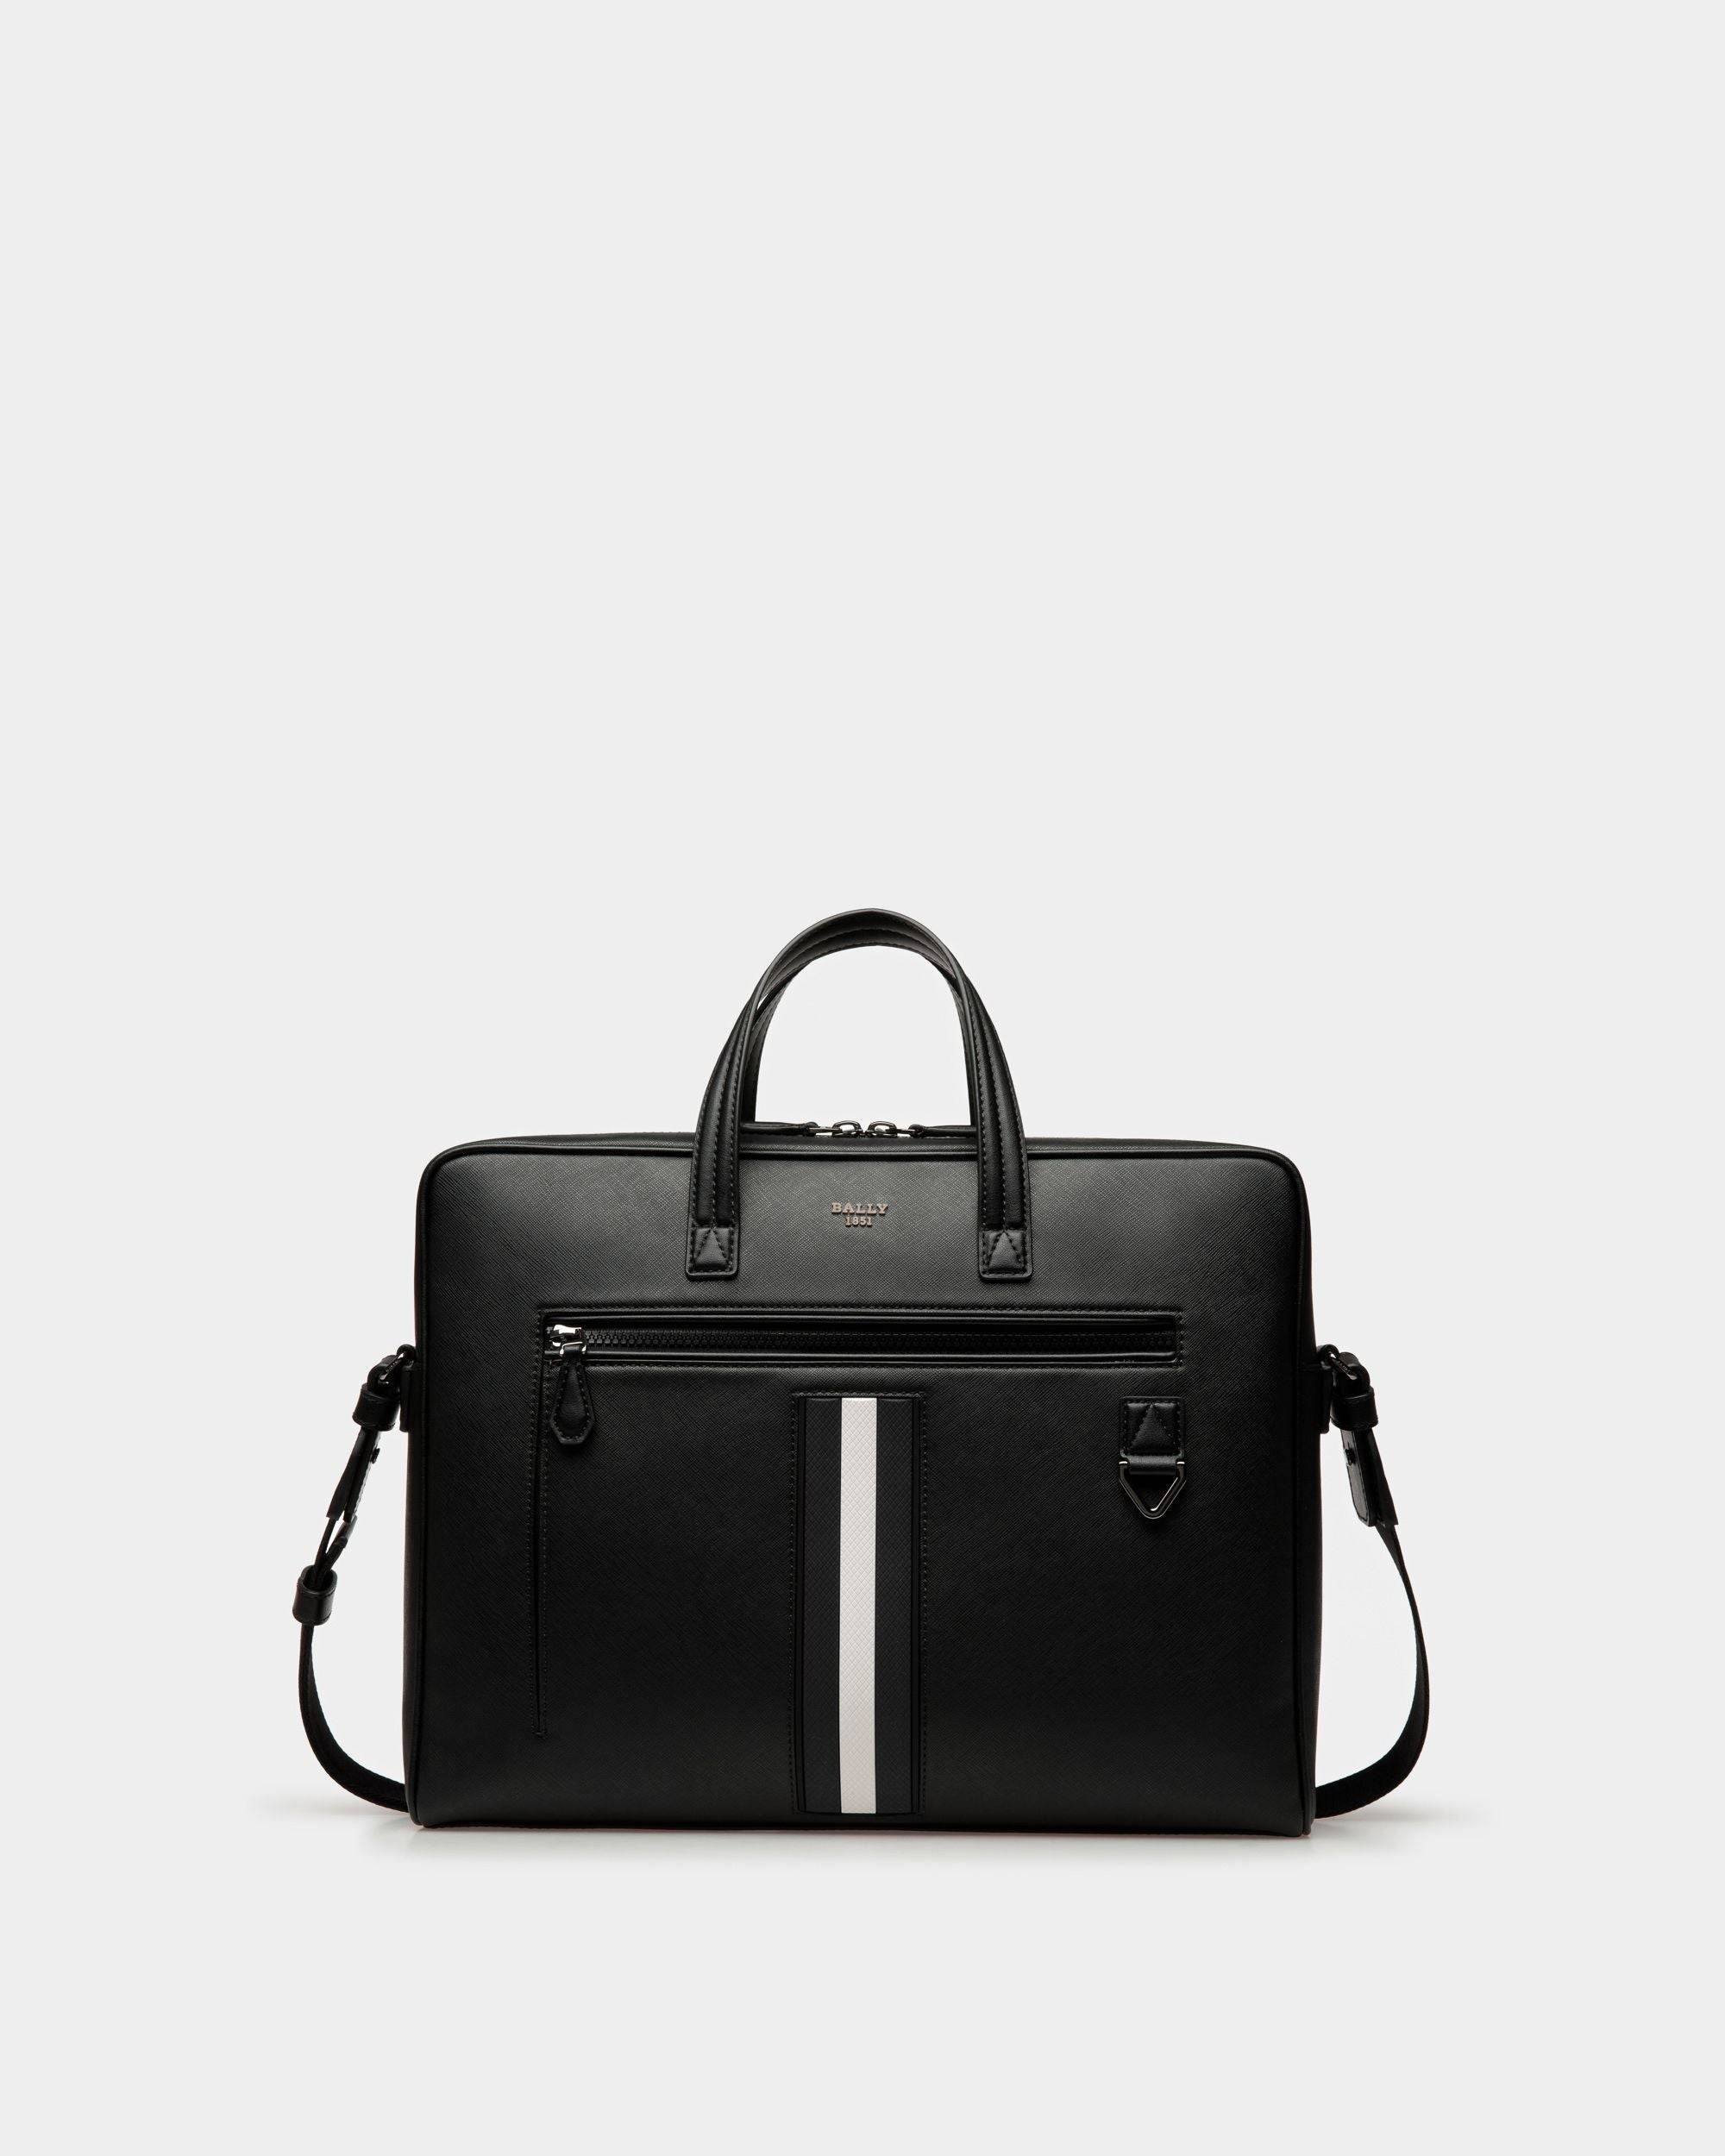 Mikes | Men's Business Bag | Black Leather | Bally | Still Life Front